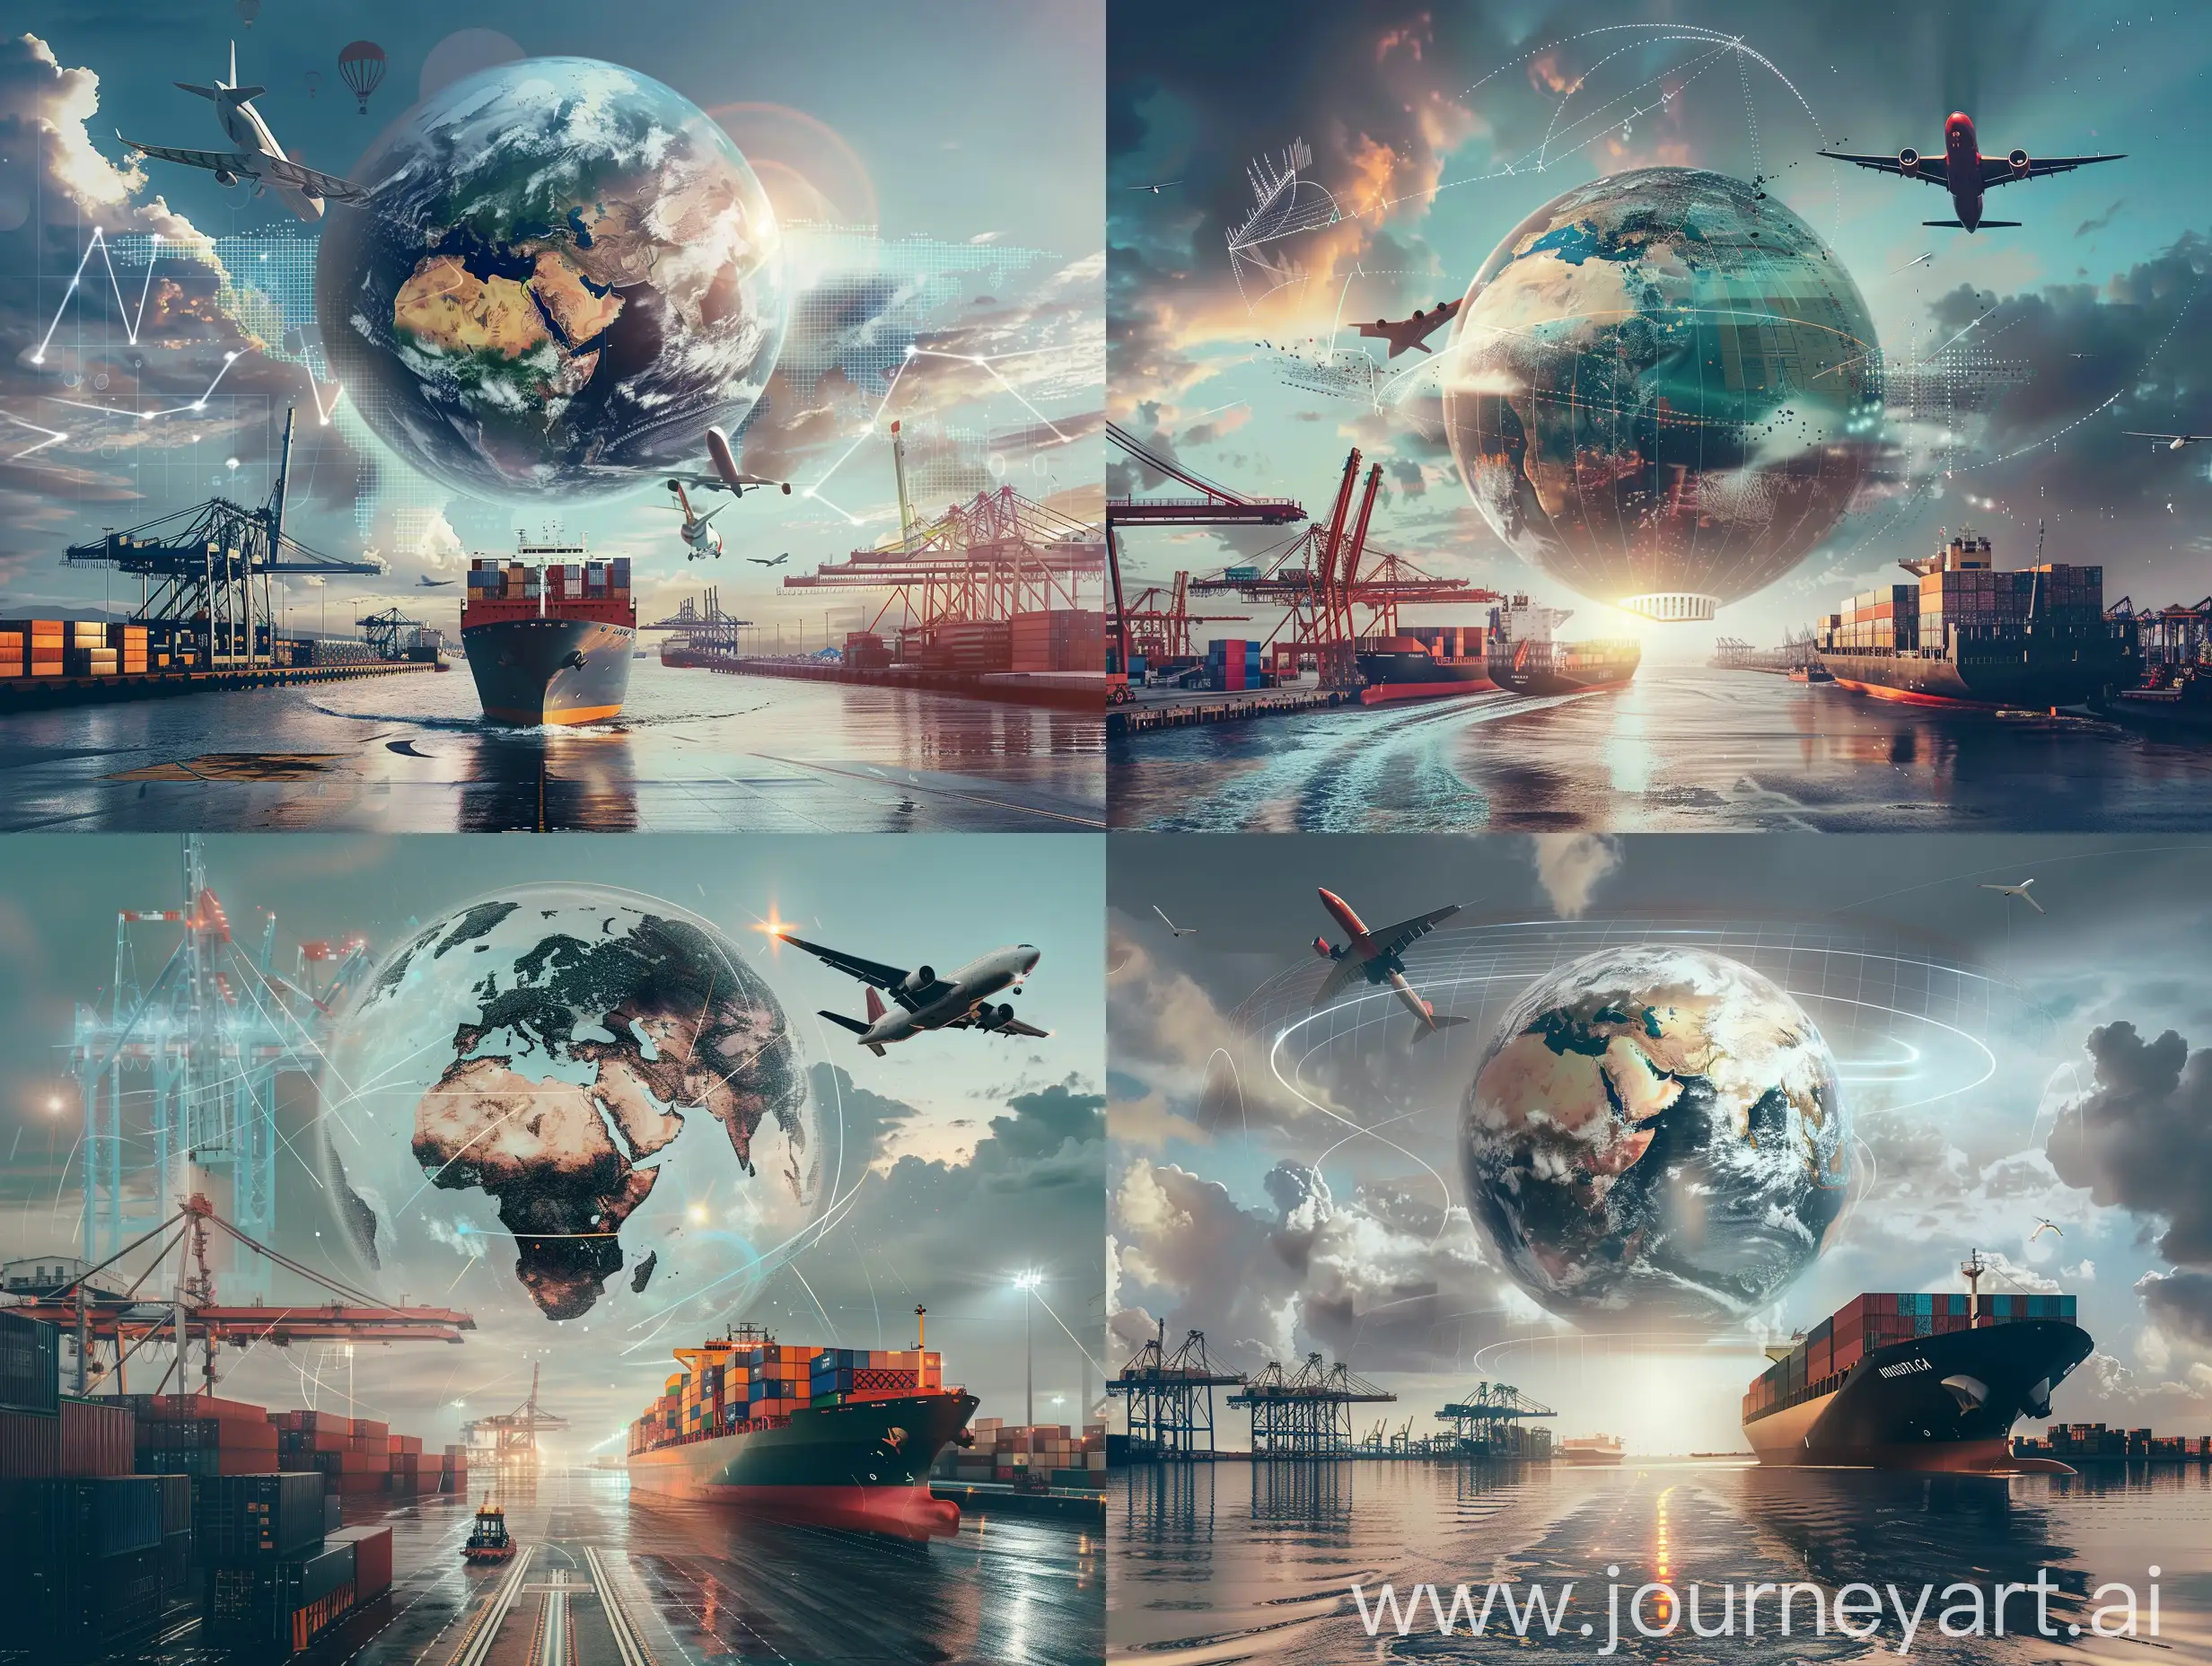 an import/export company realistic photo edit. Port scene, a big transparent globe with trade lines in the background, big airplane flying around the globe, big cargo ship on the occean and containers along with port equipments on the ground. Make it ultra realistic and blend everything seamlessly. 